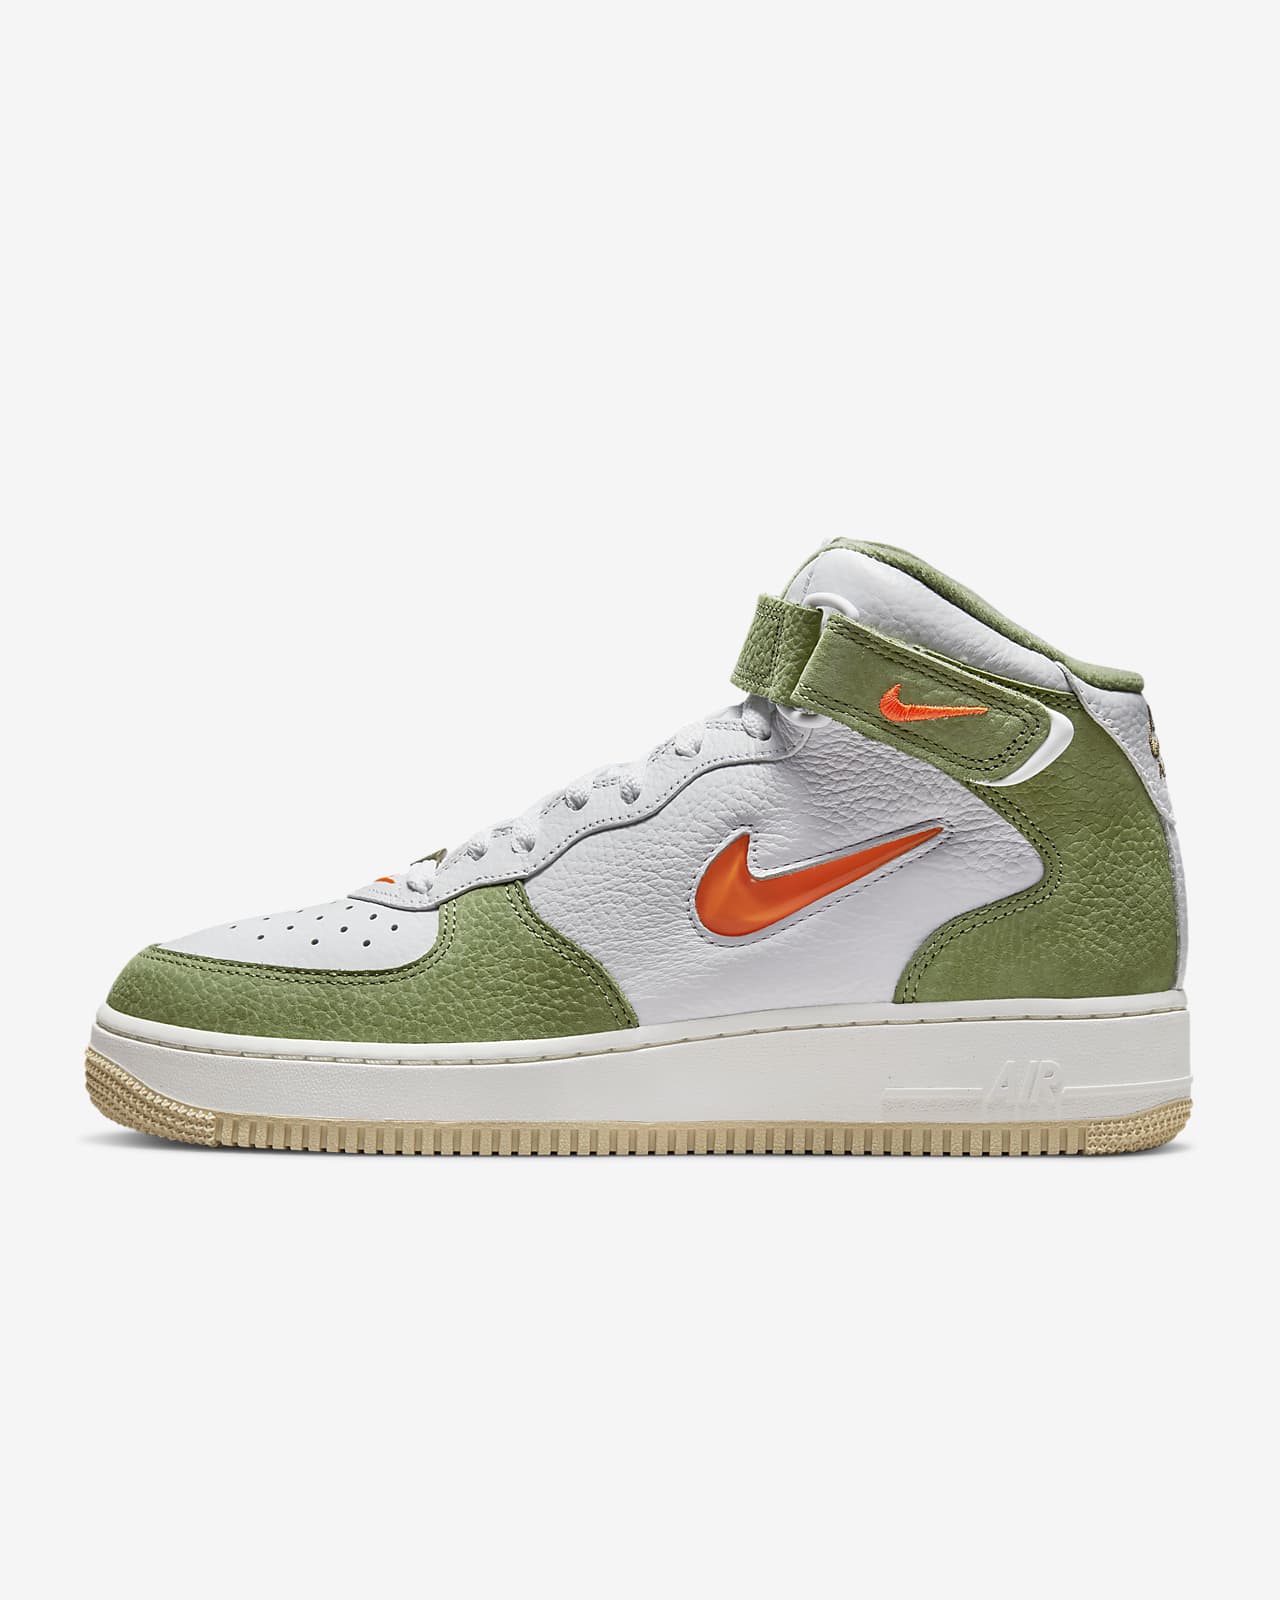 Nike Air Force 1 Mid QS Men's Shoes